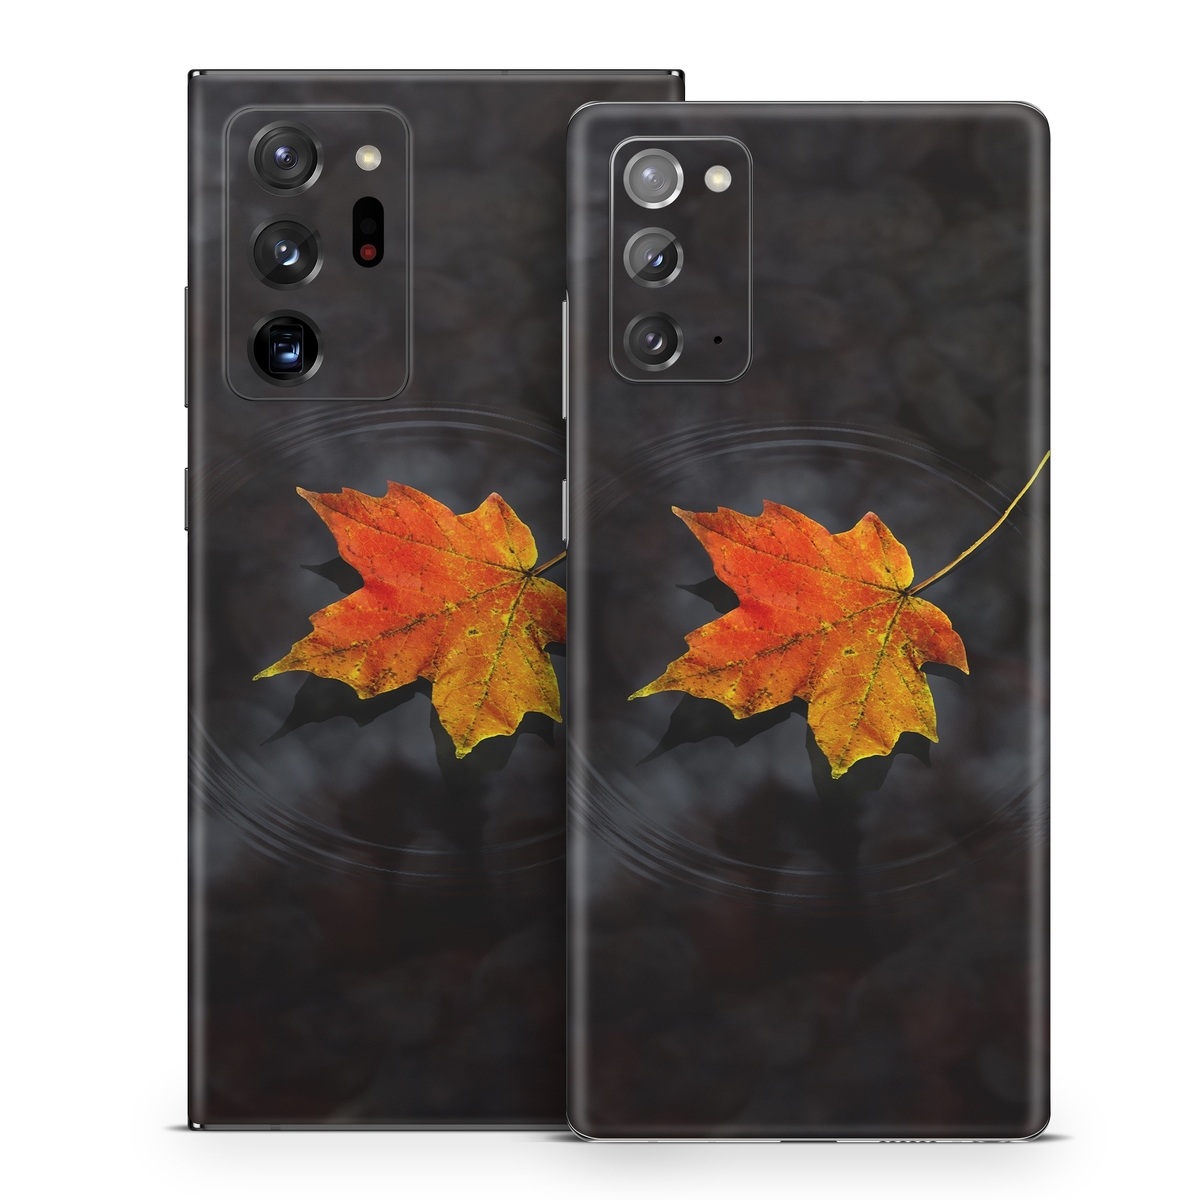 Samsung Galaxy Note 20 Series Skin design of Leaf, Maple leaf, Tree, Black maple, Sky, Yellow, Deciduous, Orange, Autumn, Red, with black, red, green colors